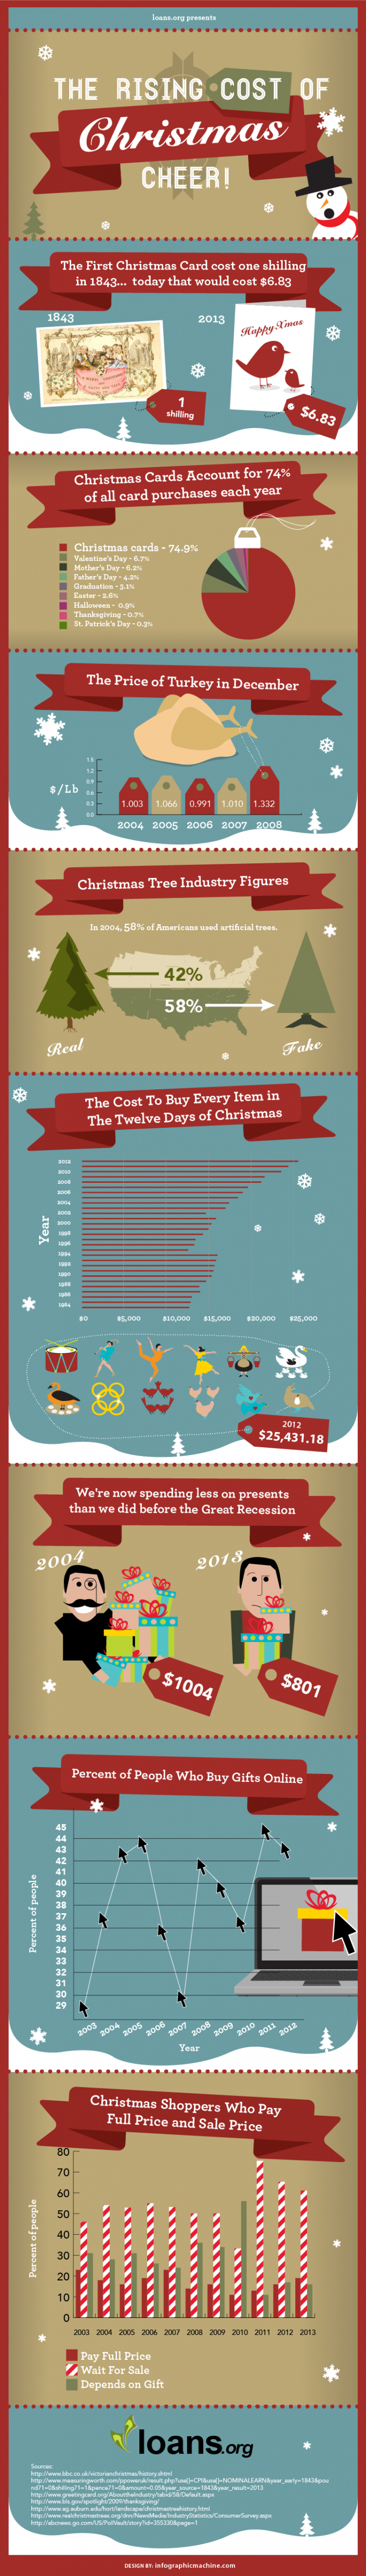 The Rising Cost of Christmas